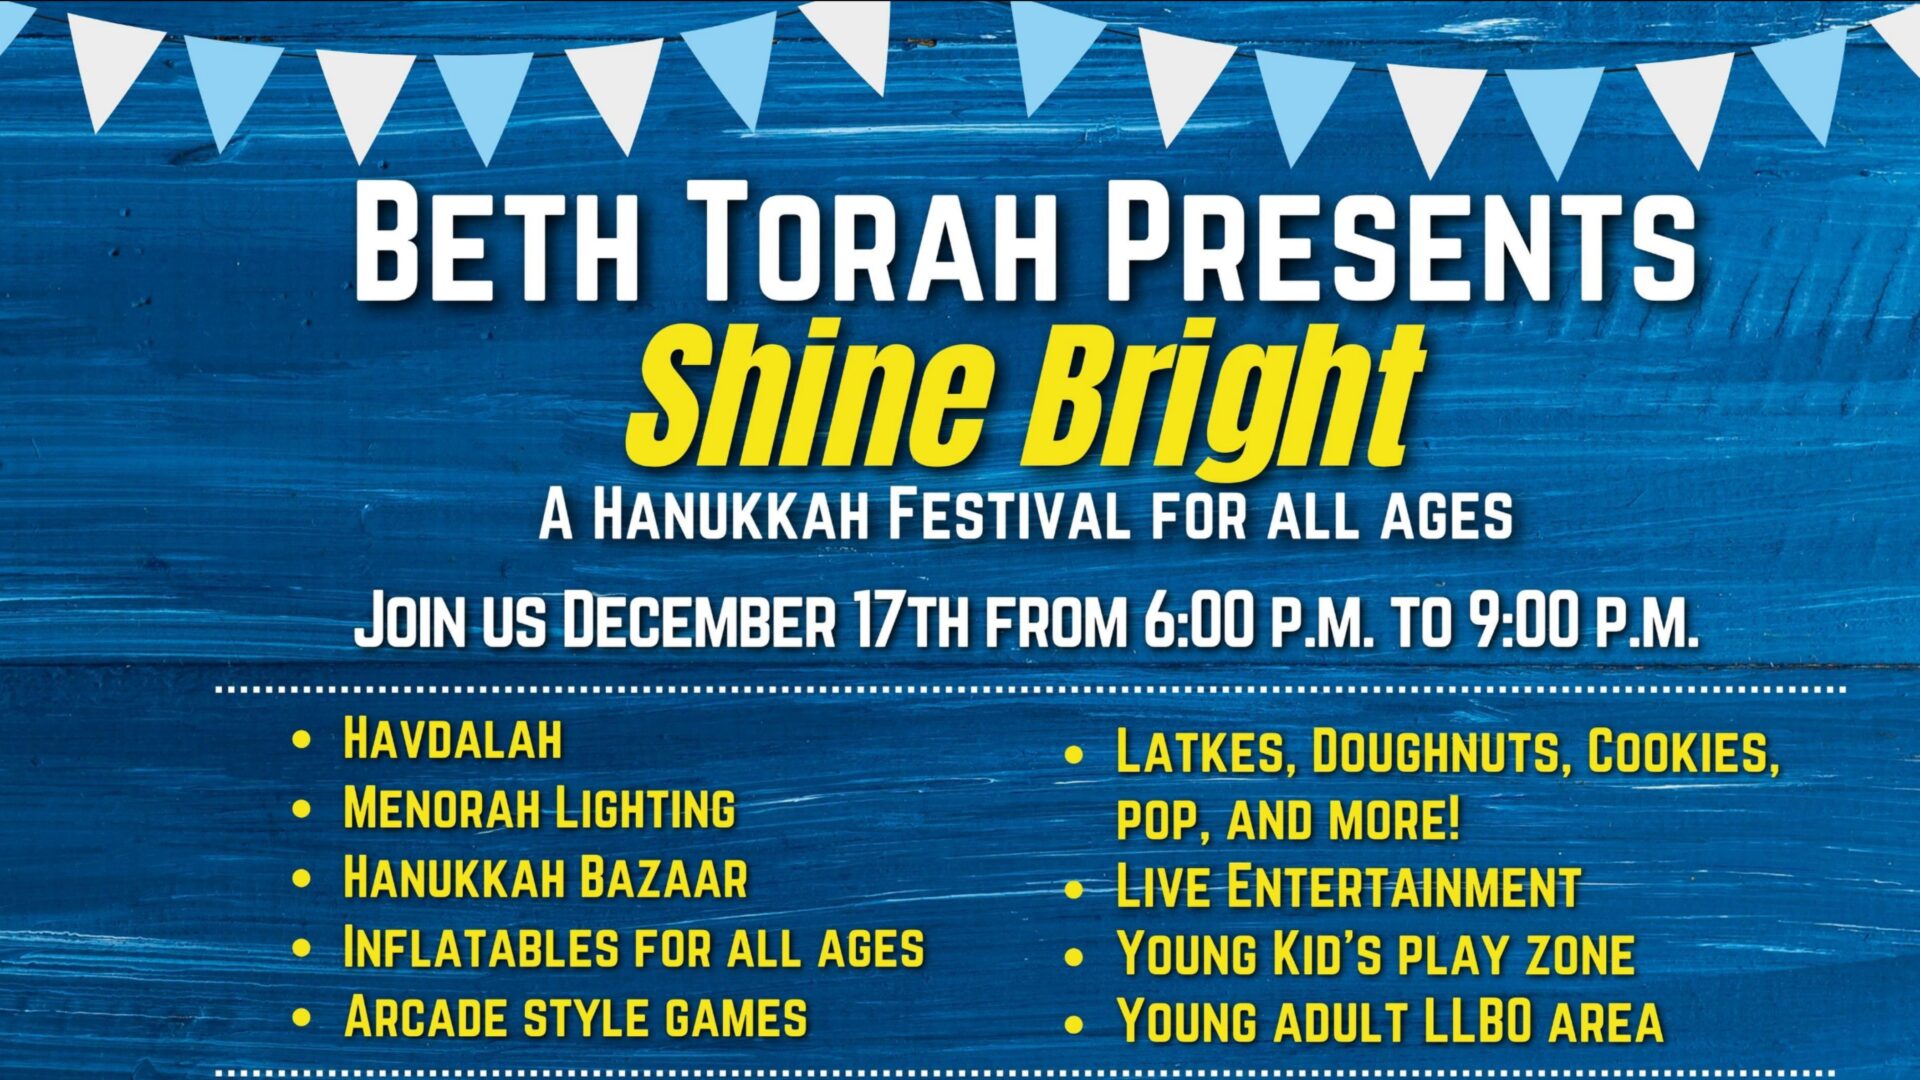 Beth Torah Presents Shine Bright; A hanukkah festival for all ages, Join us December 17th from 6:99 p.m. to 9:00 p.m. Havdalah, Menorah Lighting, Hanukkah Bazaar; Inflatables for all ages, Arcade style games, Latkes, doguhnuts, cookies, pop, and more! Live Entertainment, Young Kid's Play Zone, Young Adult LLB0 Area."